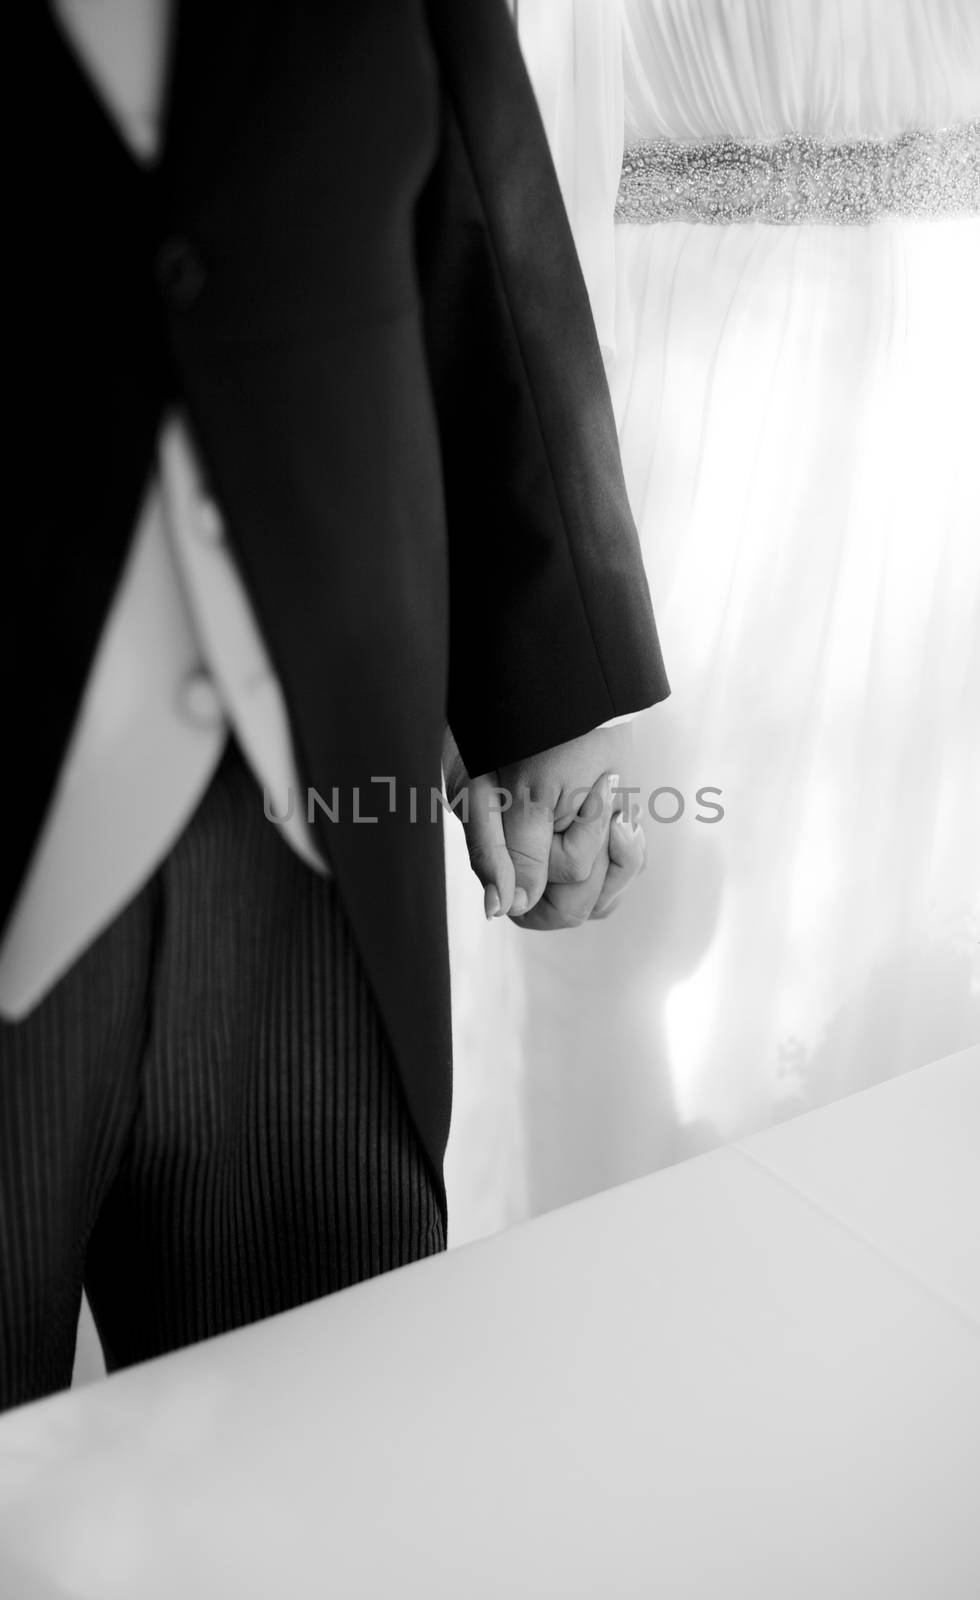 Black and white artistic digital rectangular horizontal photo of the bride wearing white wedding dress and bridegroom standing wearing long coat morning suit with waste coat holding hands during church wedding marriage ceremony in Madrid Spain. Shallow depth of on foreground with background out of focus. 